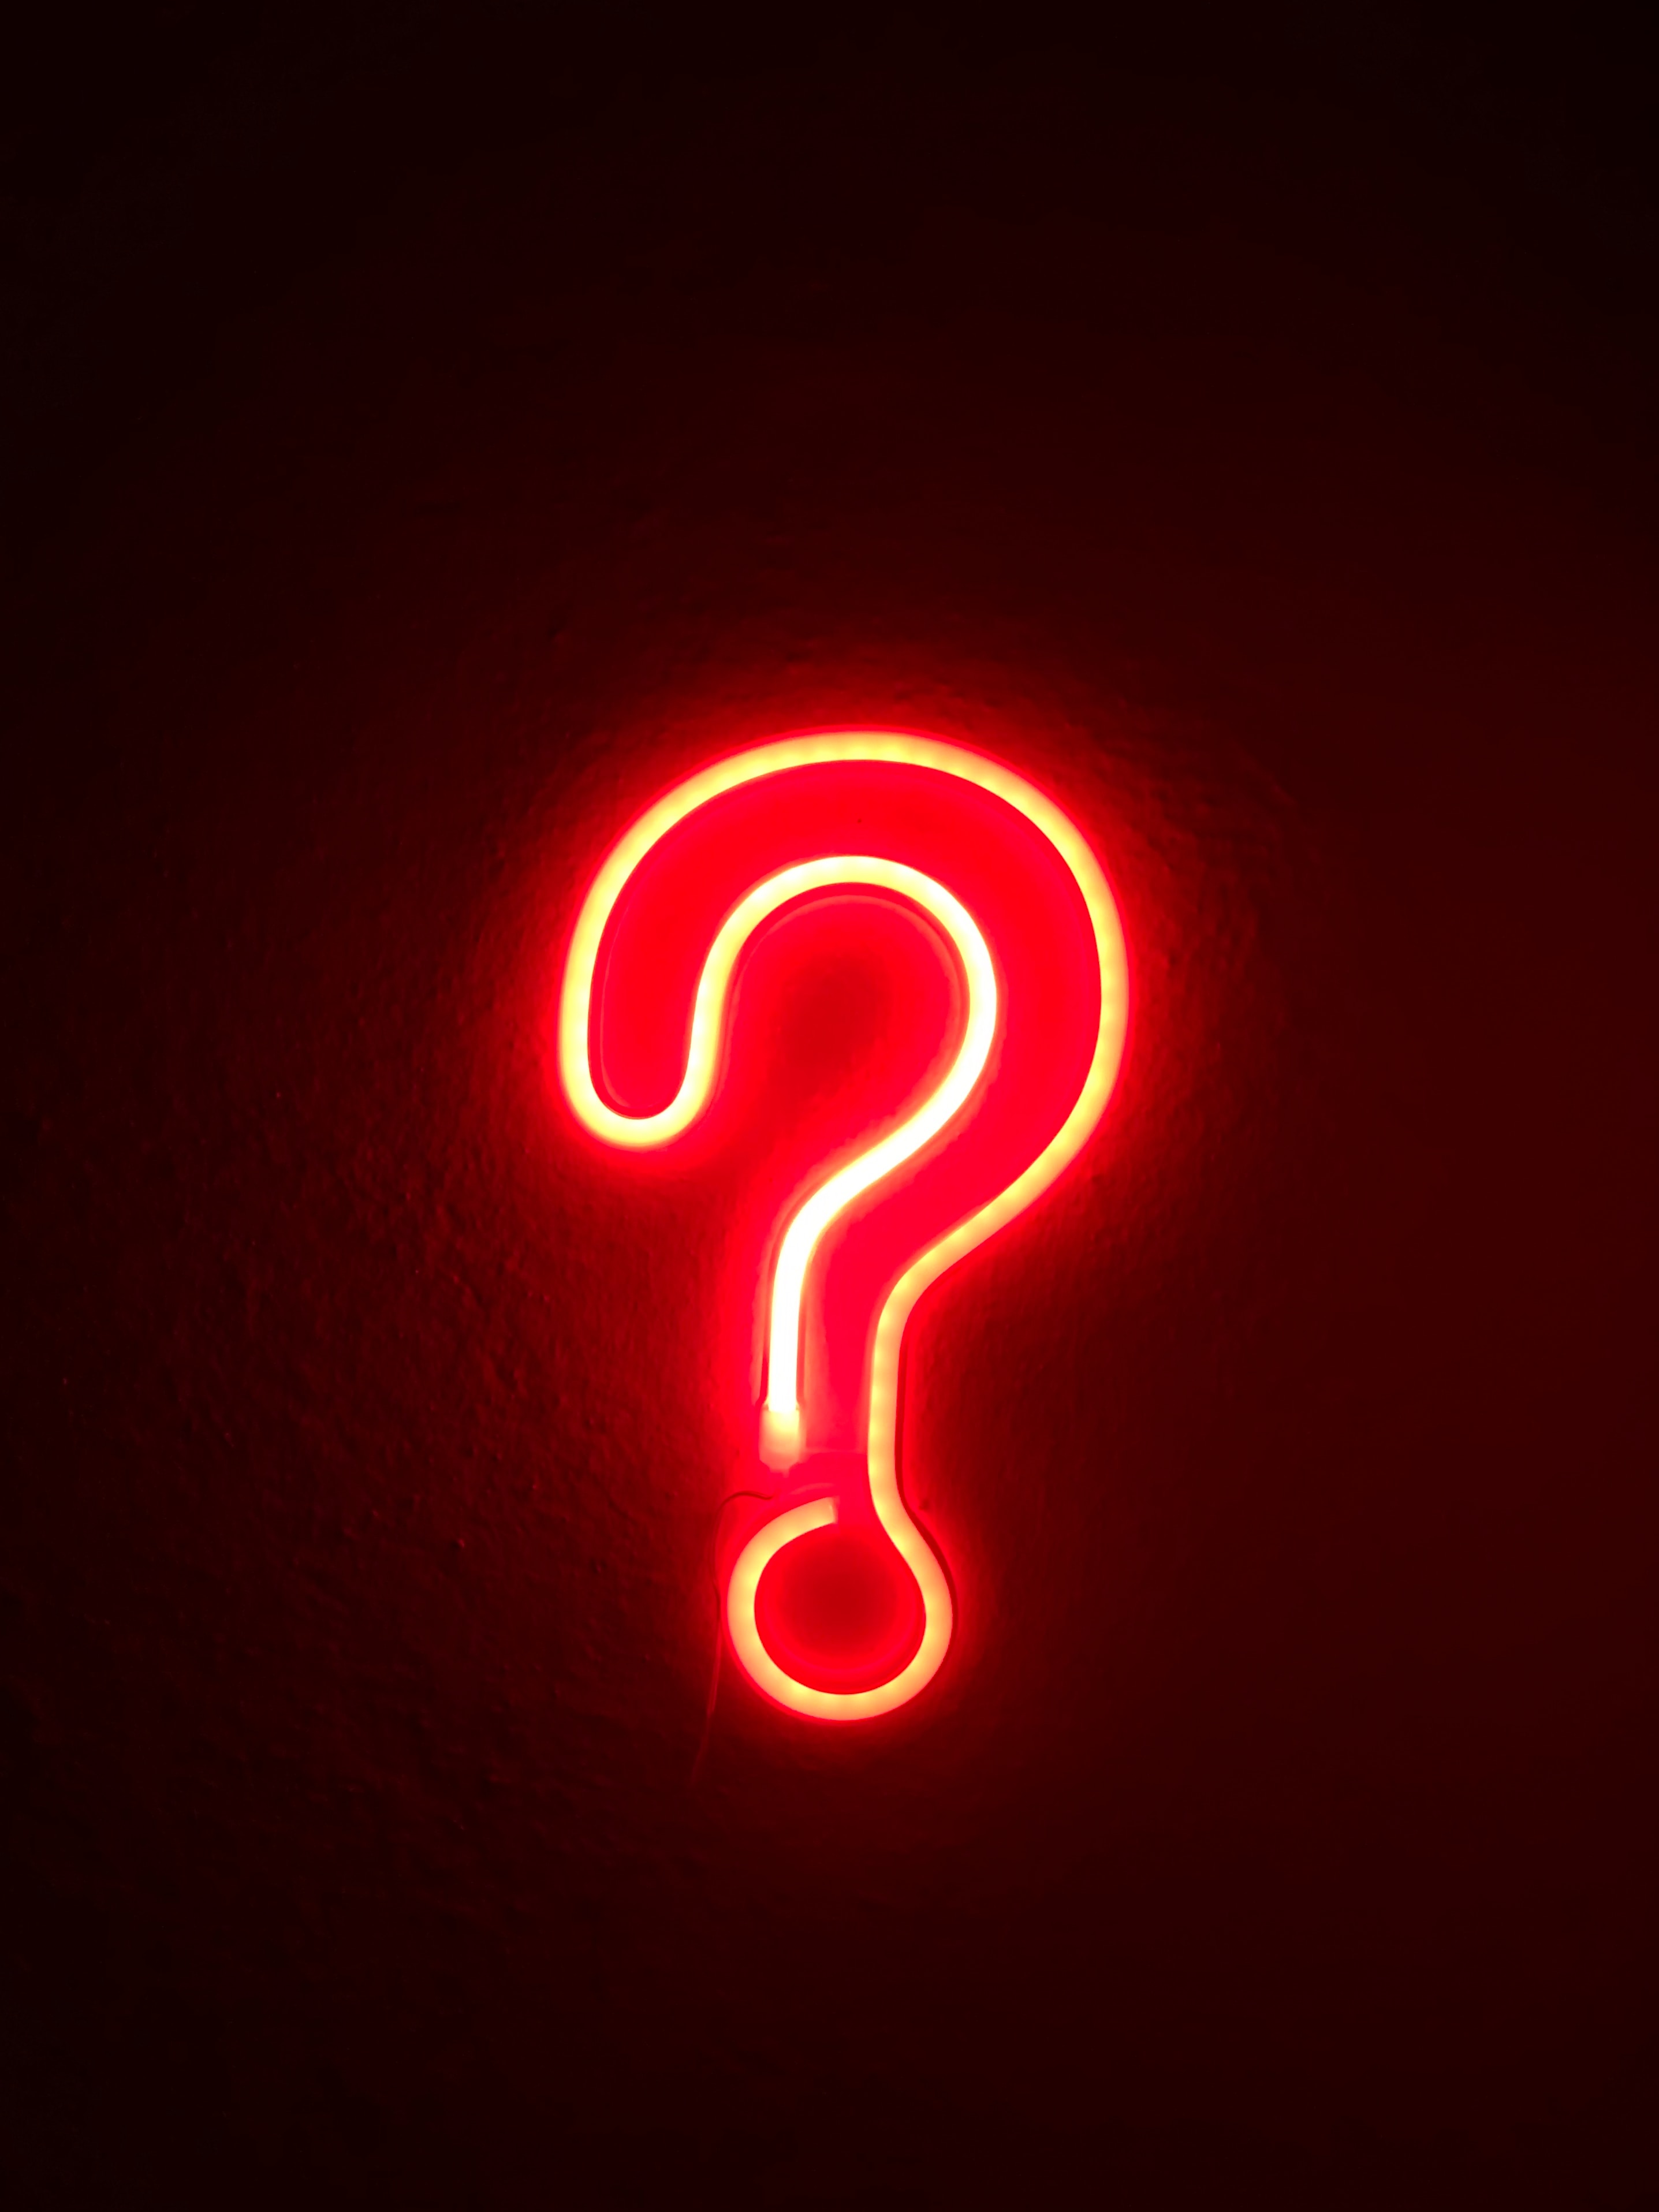 A red neonsign of a questionmark